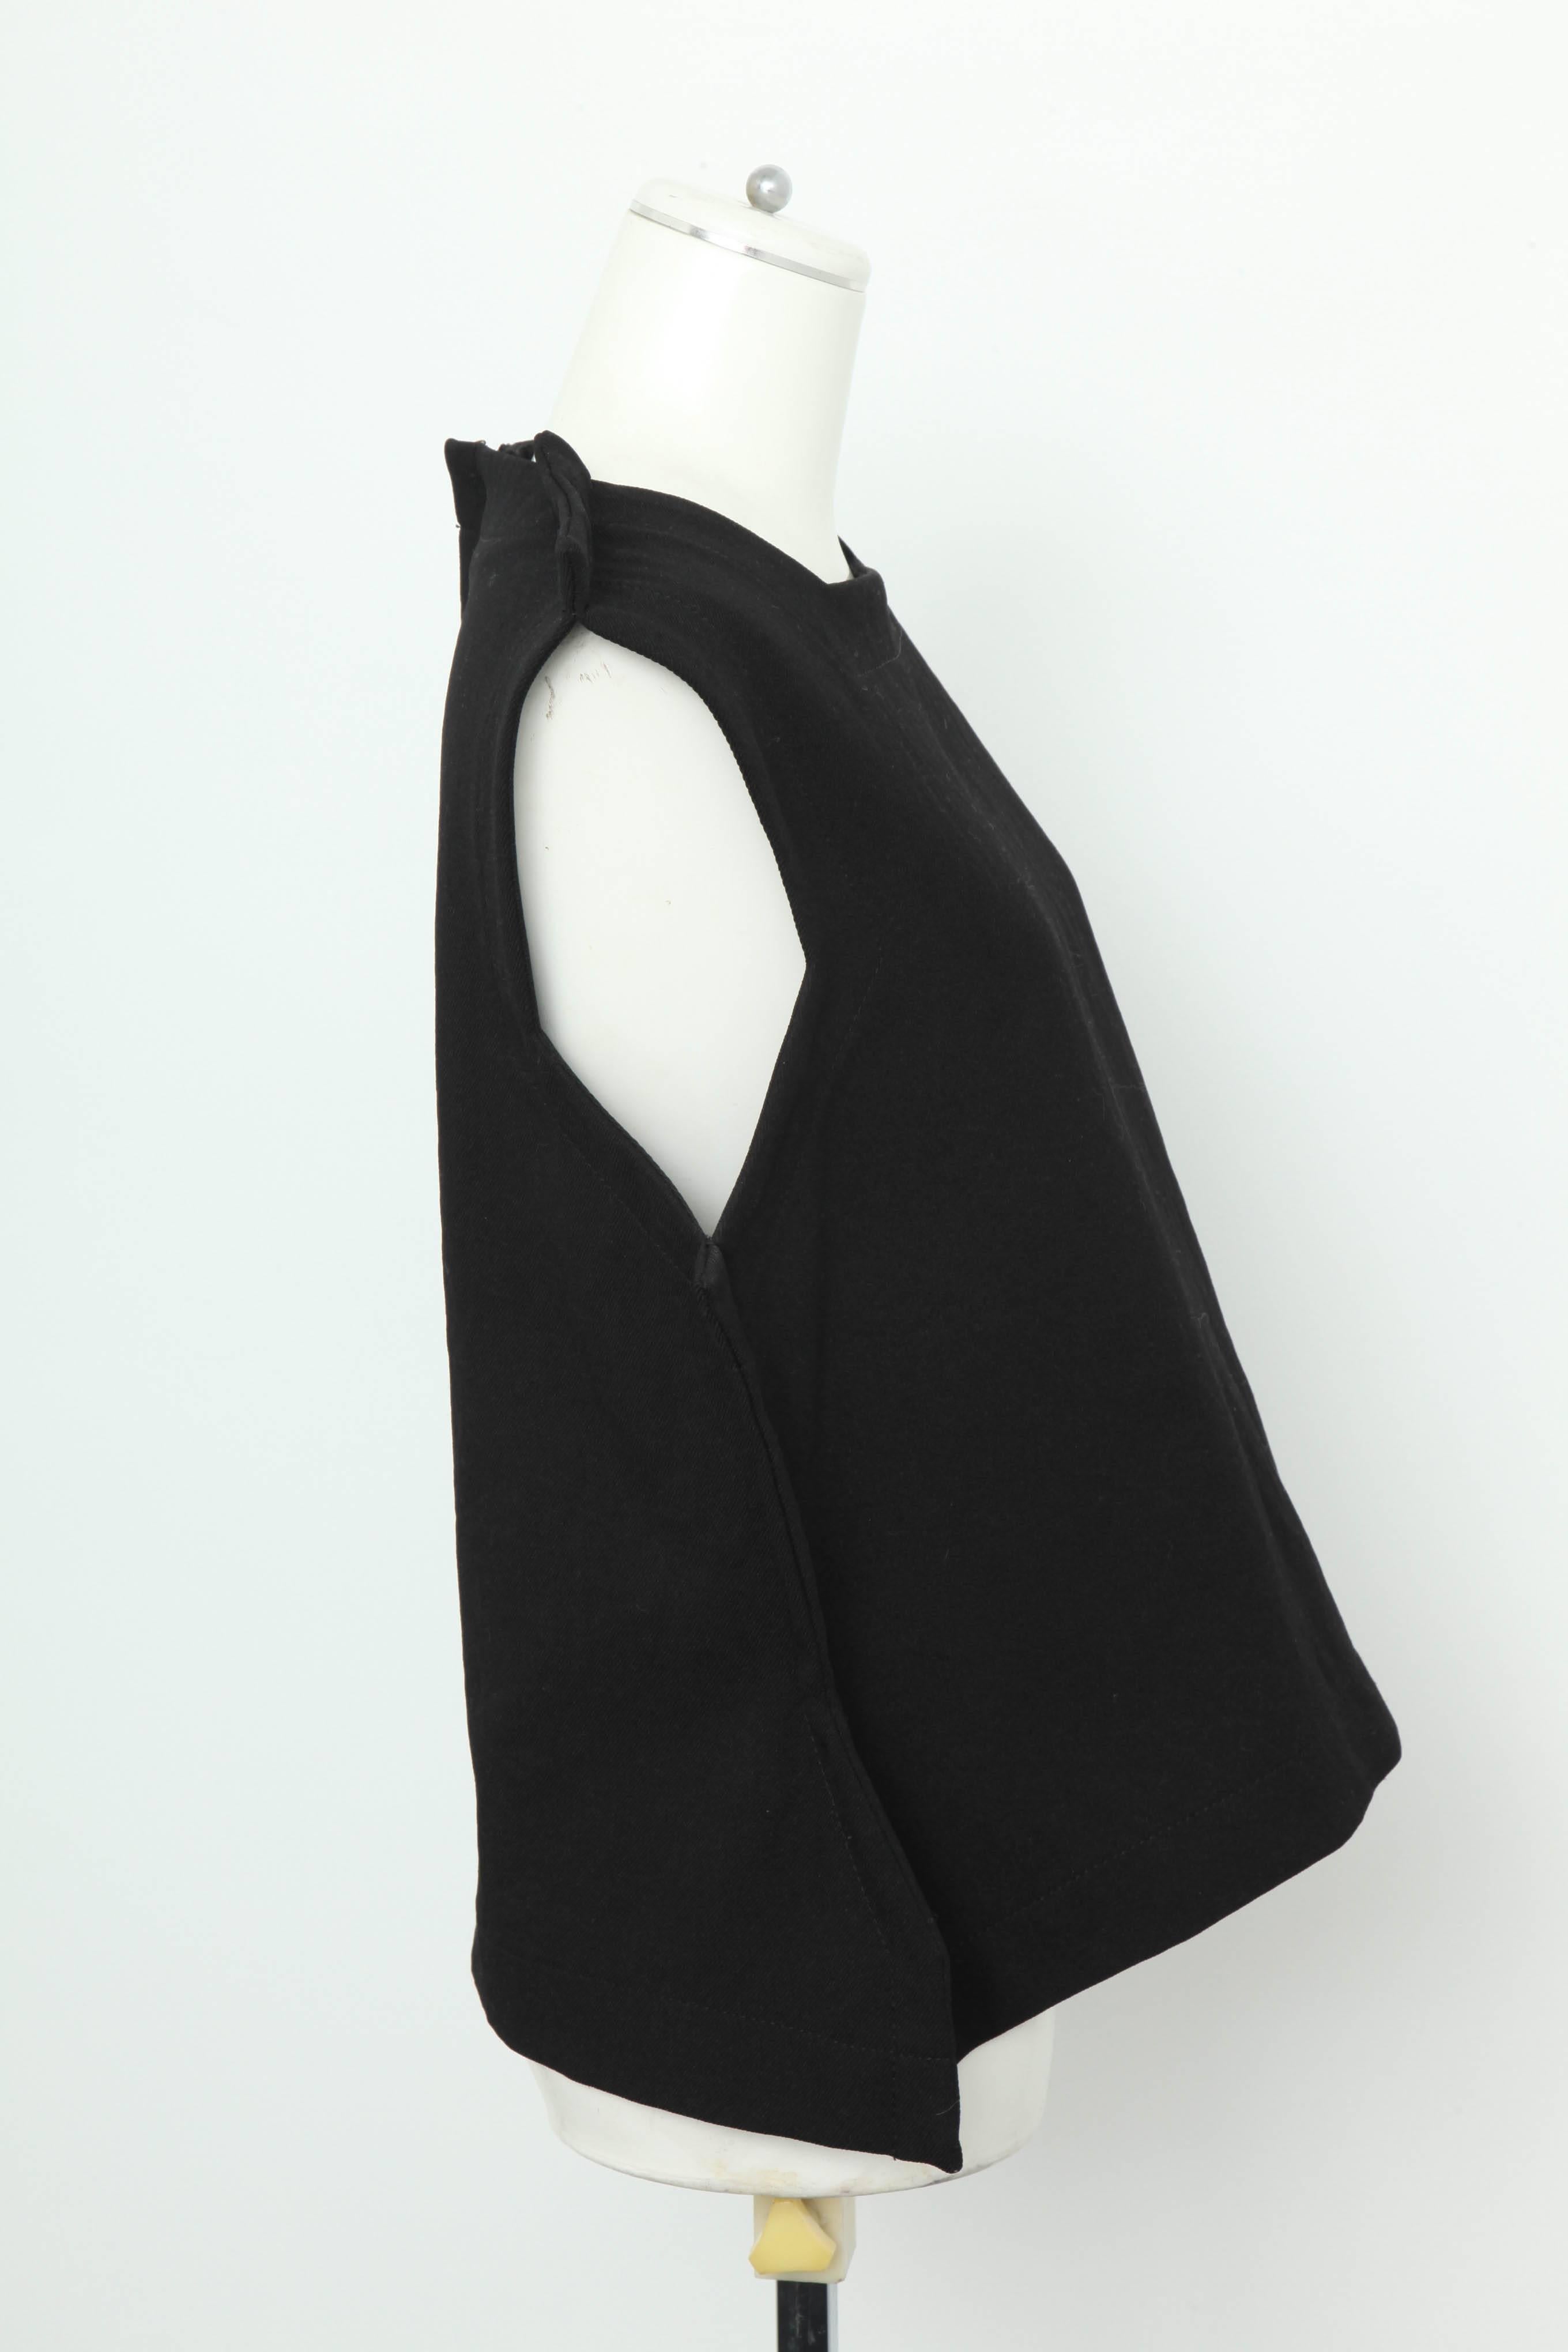 Rare Comme Des Garcons black top from highly acclaimed 2012 Fall/Winter 2 dimensional collection. Size M